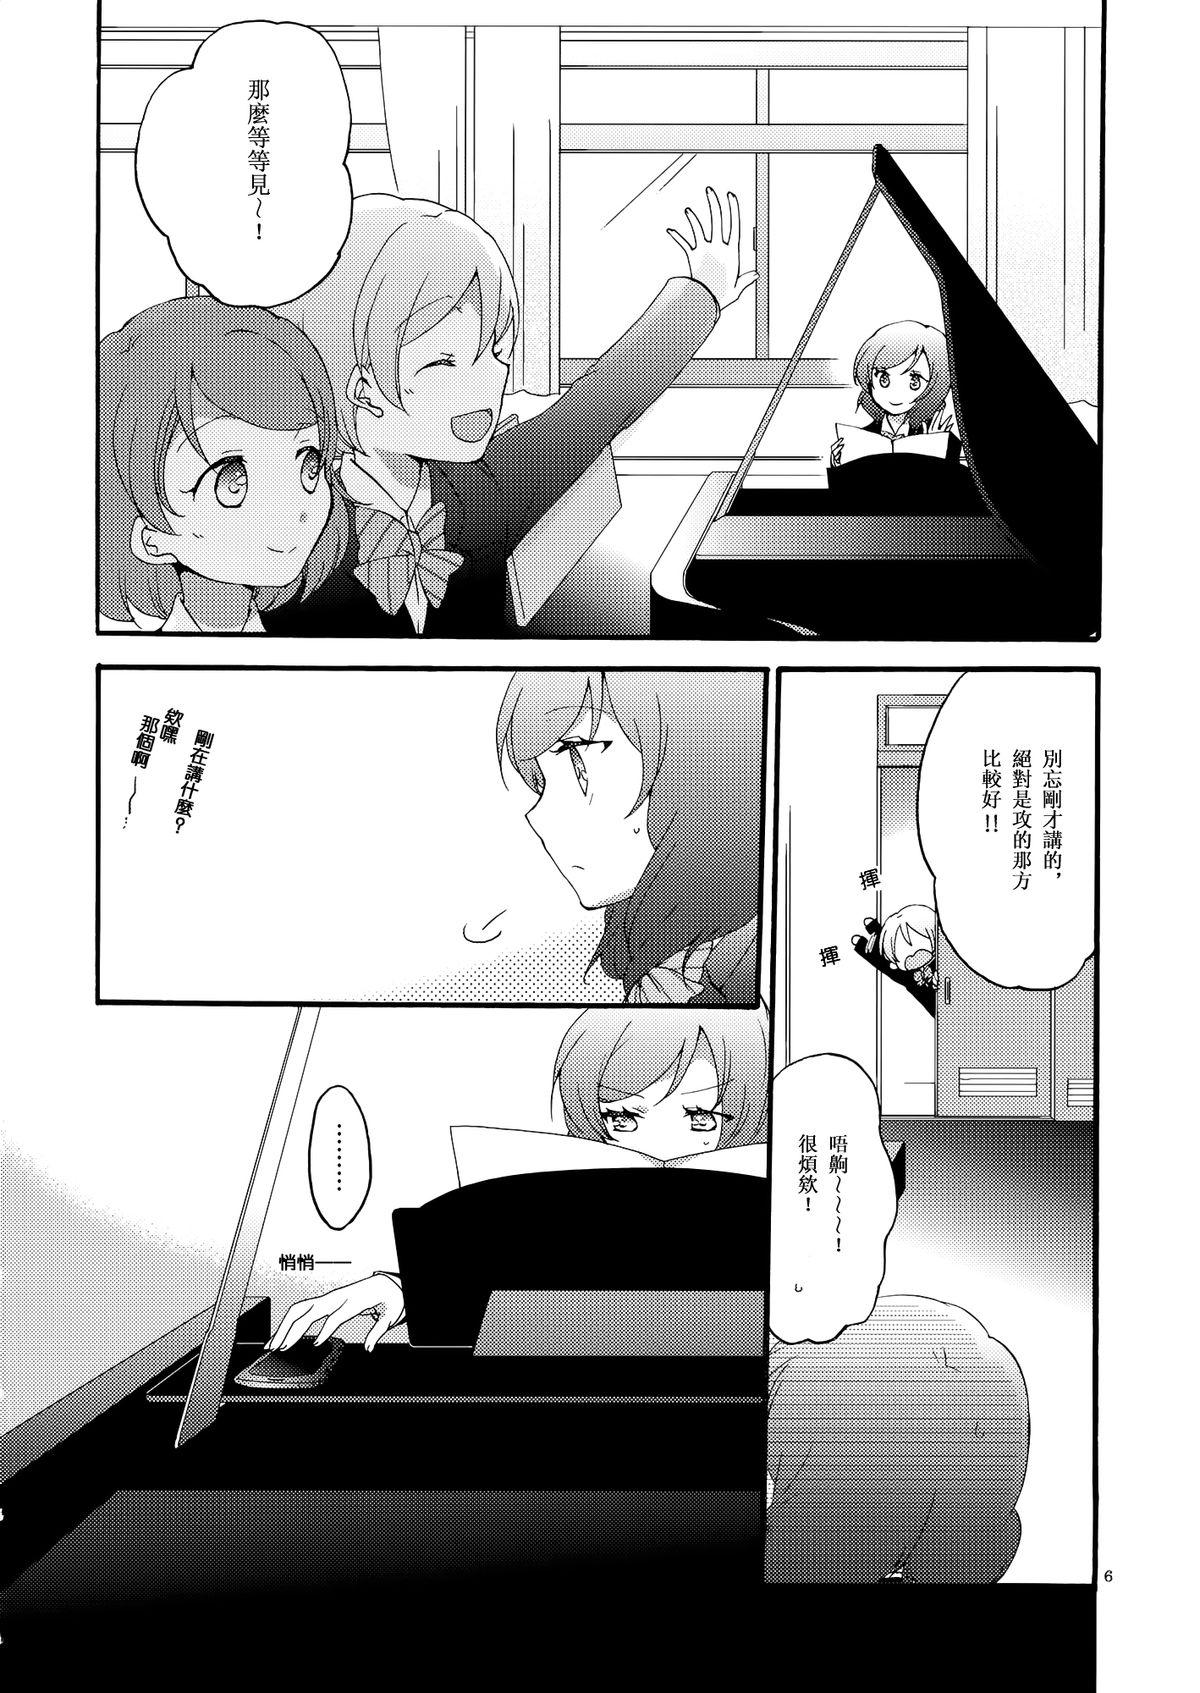 Viet Lovesick Girl - Love live Pack - Page 5